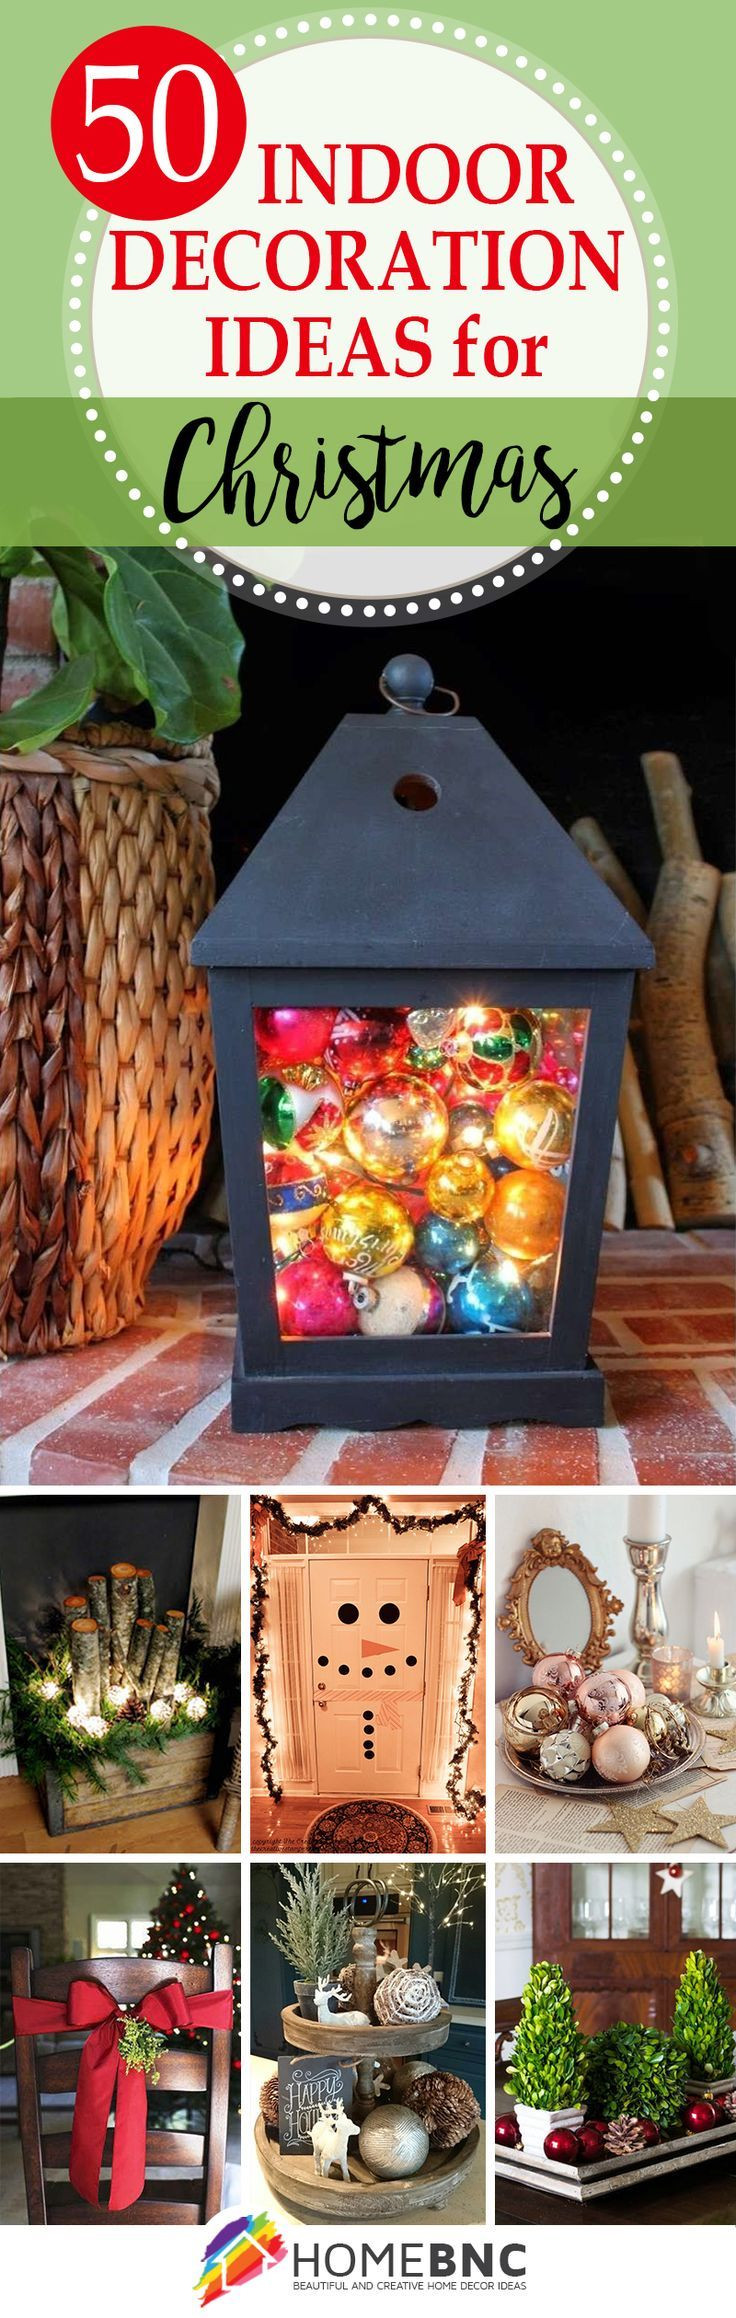 Indoor Christmas Lights Ideas
 25 best ideas about Indoor Christmas Decorations on